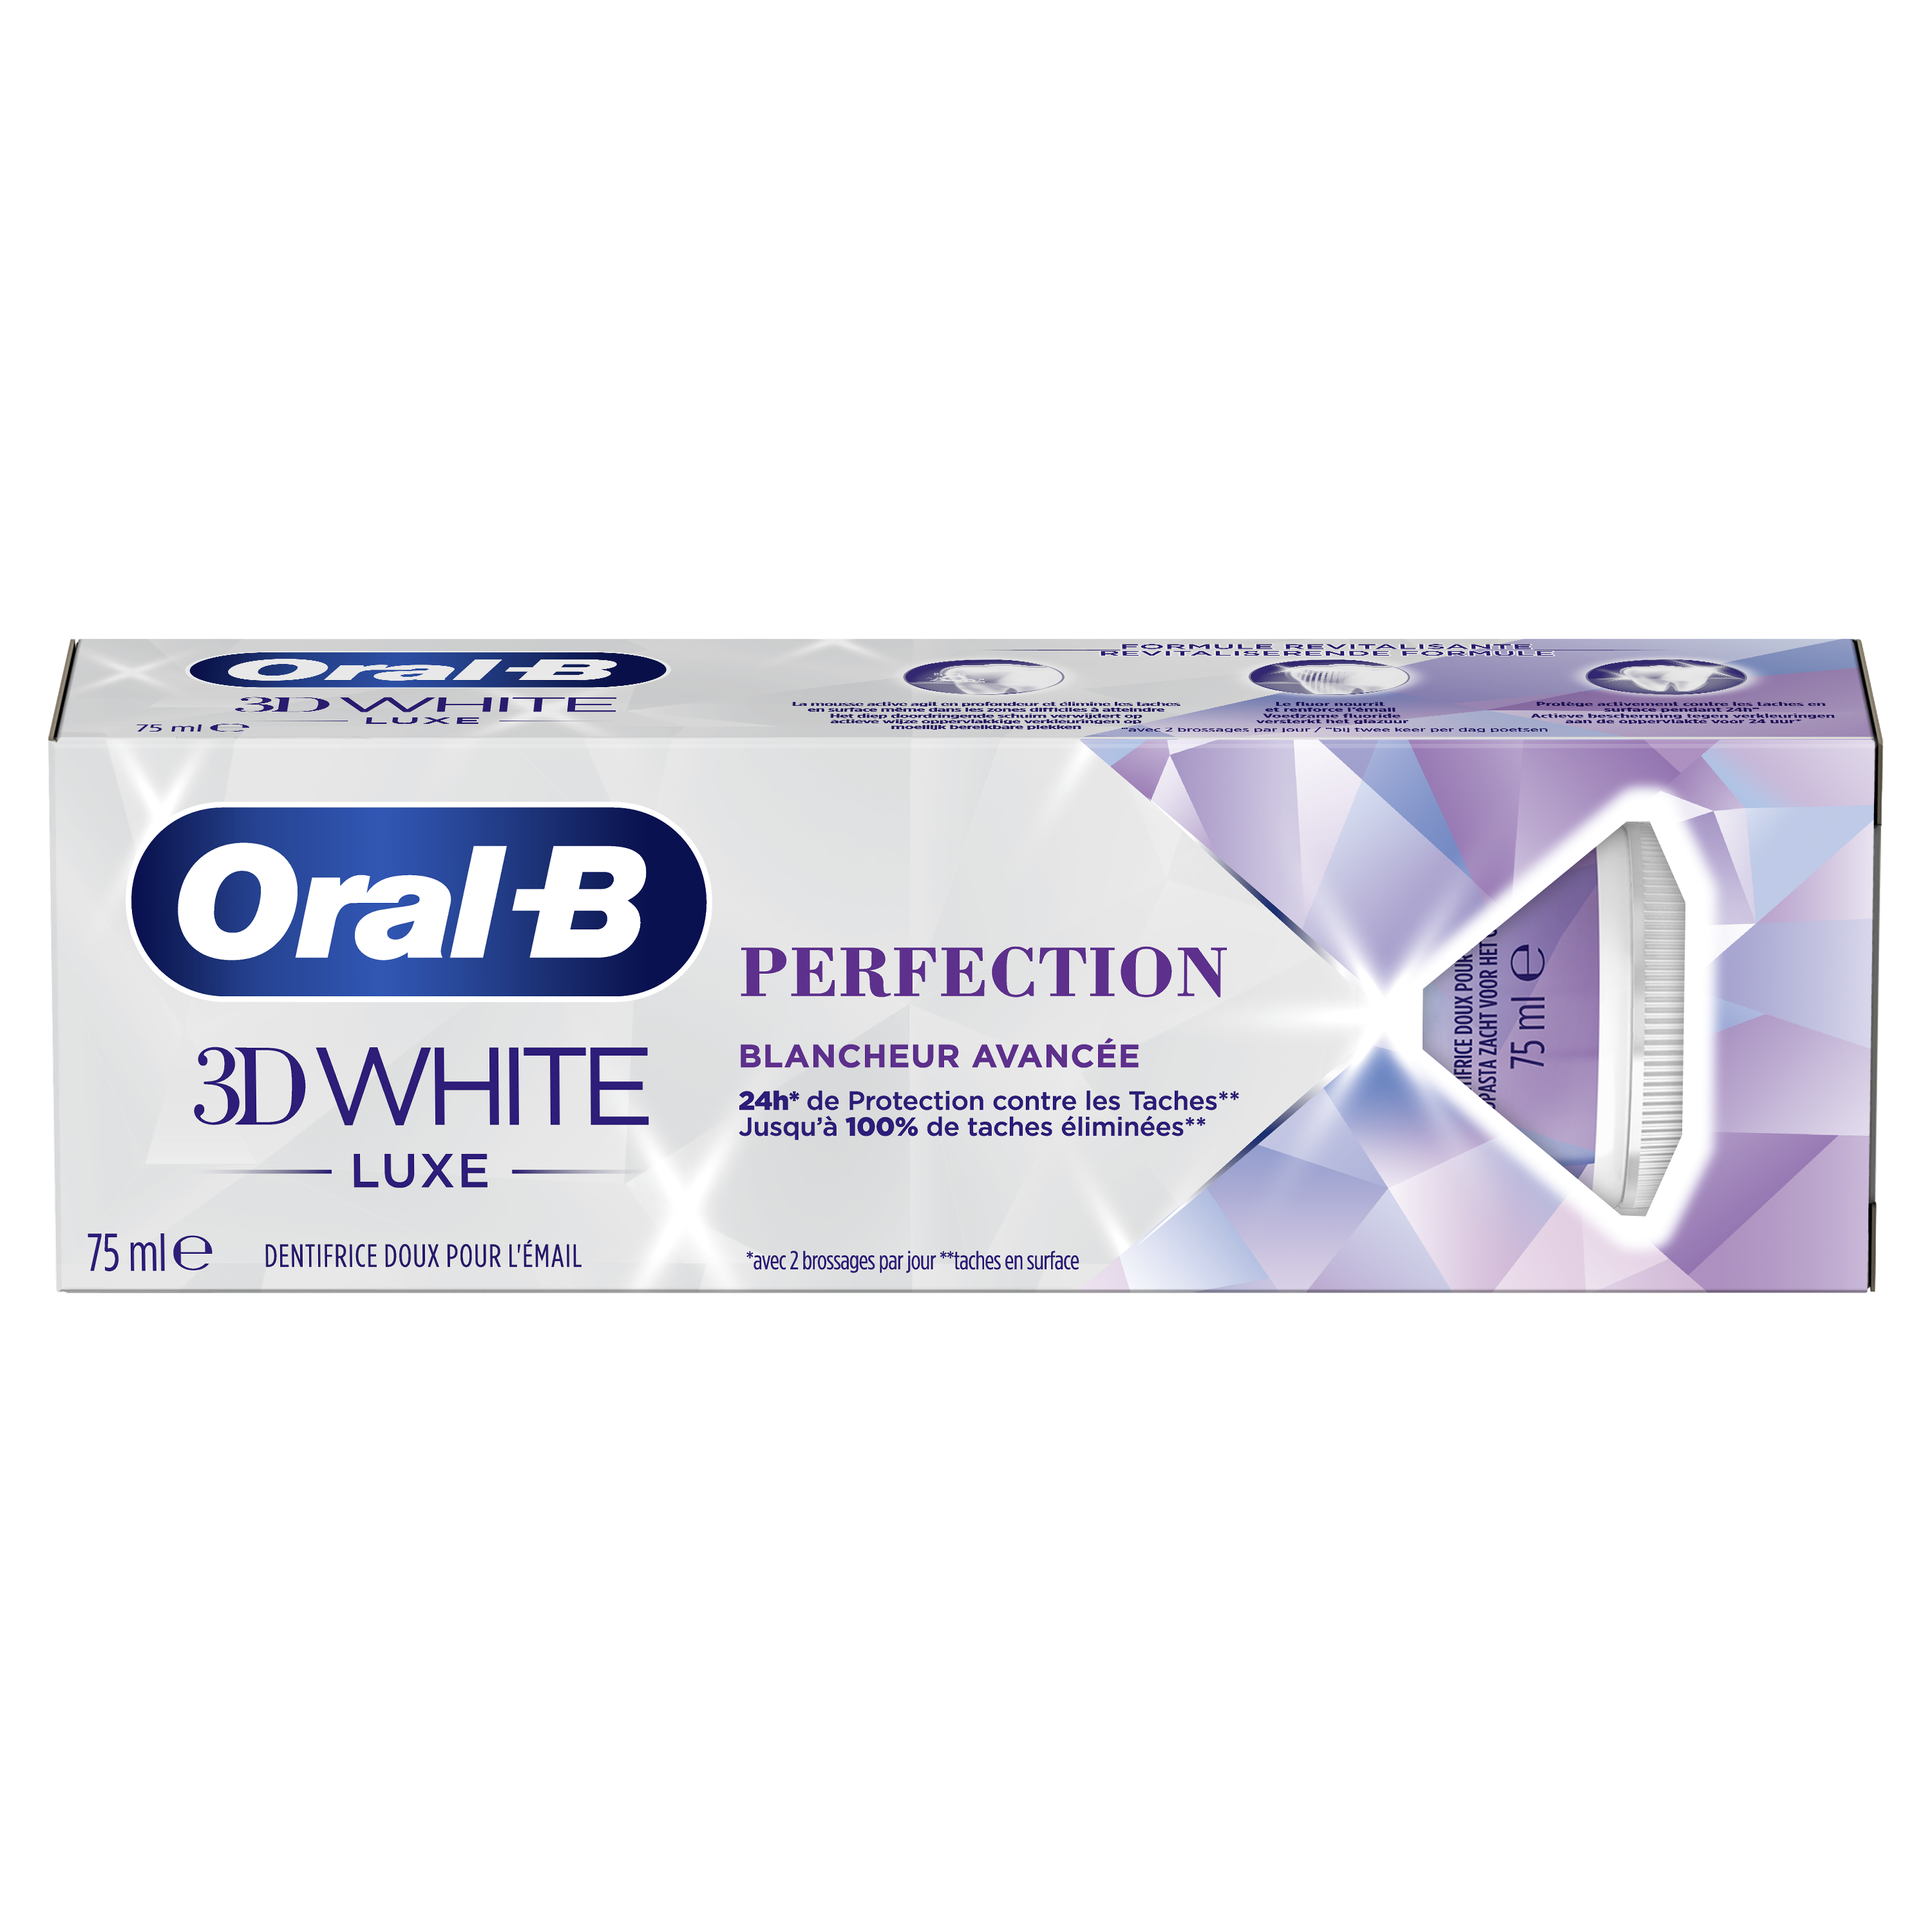 optocht lava toediening Oral-B 3D White Luxe Perfection Tandpasta | Oral-B